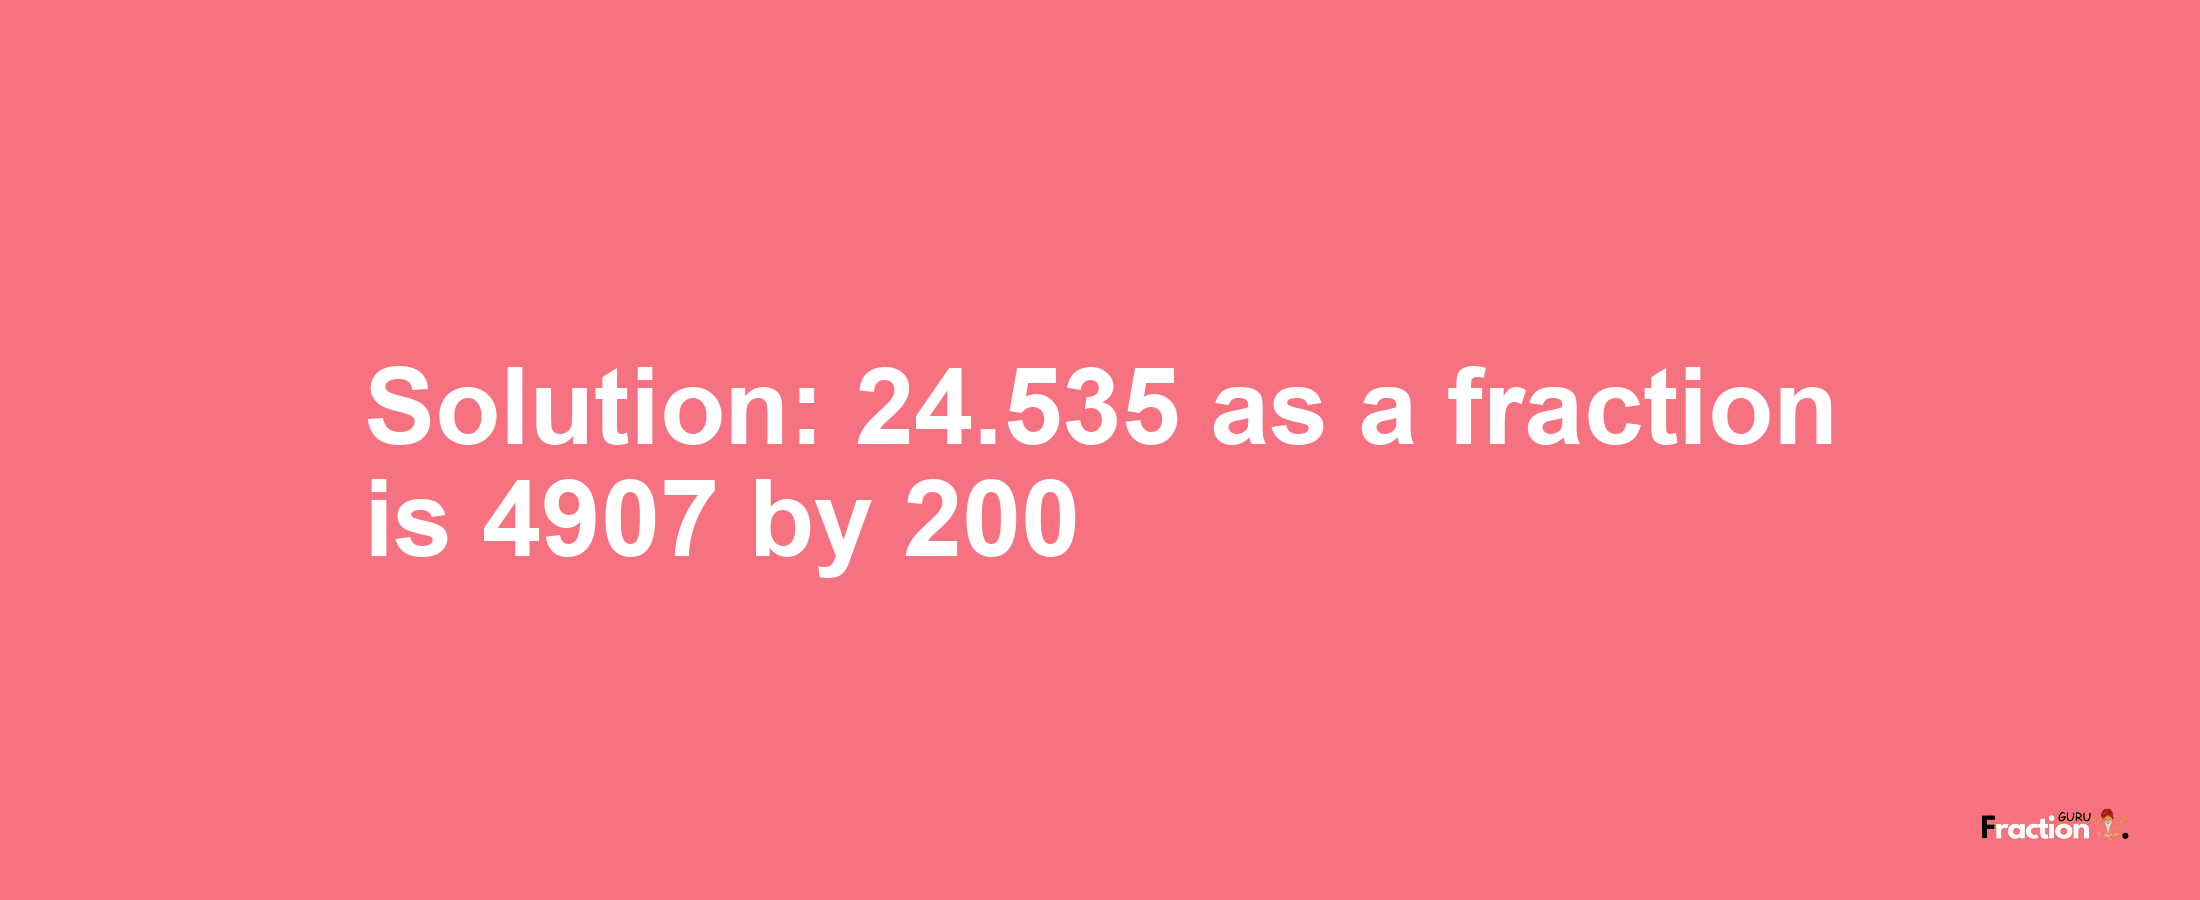 Solution:24.535 as a fraction is 4907/200